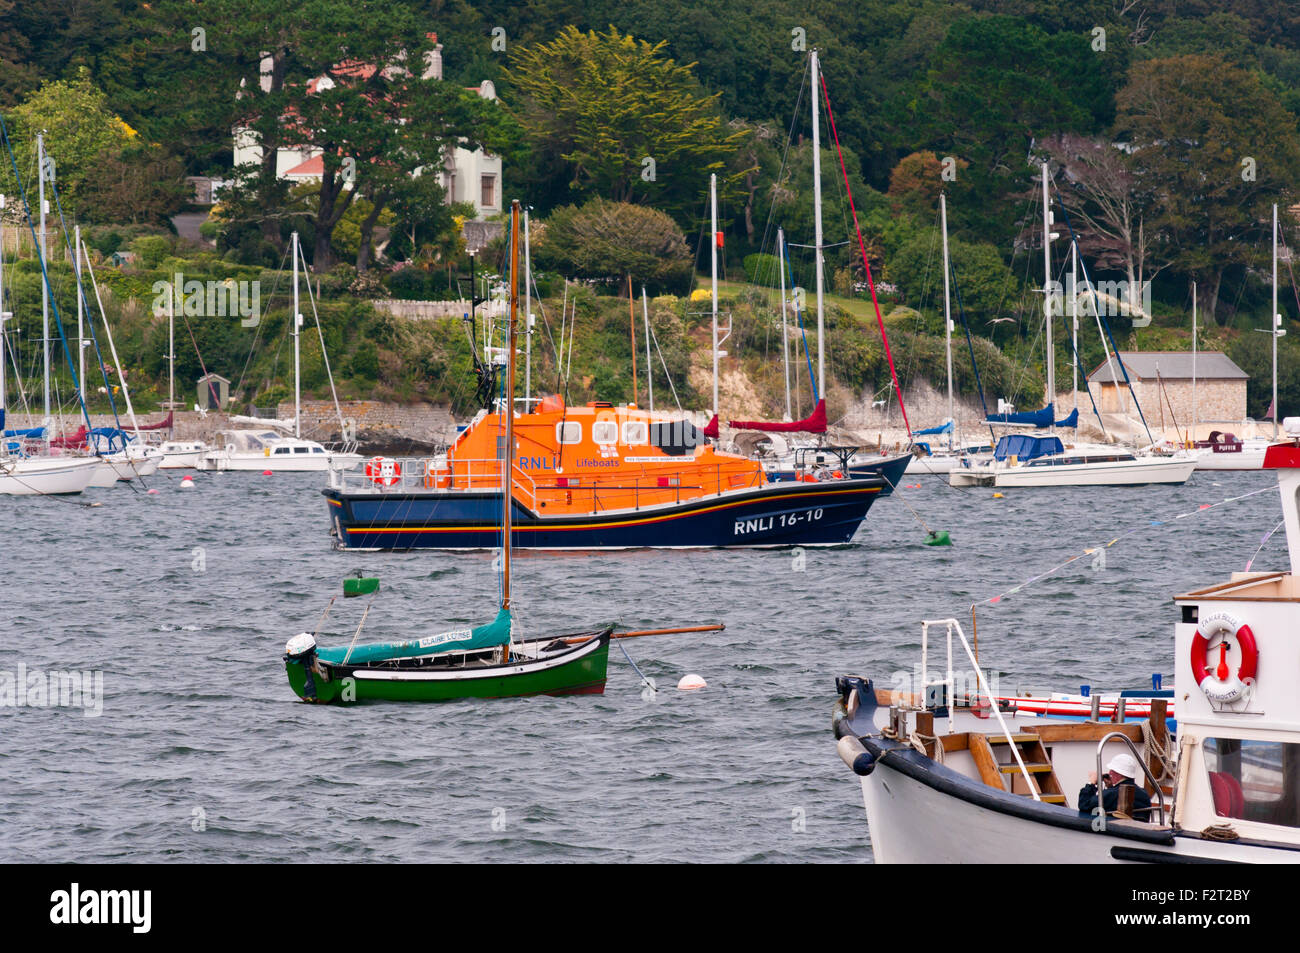 Falmouth RNLI Lifeboat Moored In Falmouth Harbour Cornwall England UK Stock Photo